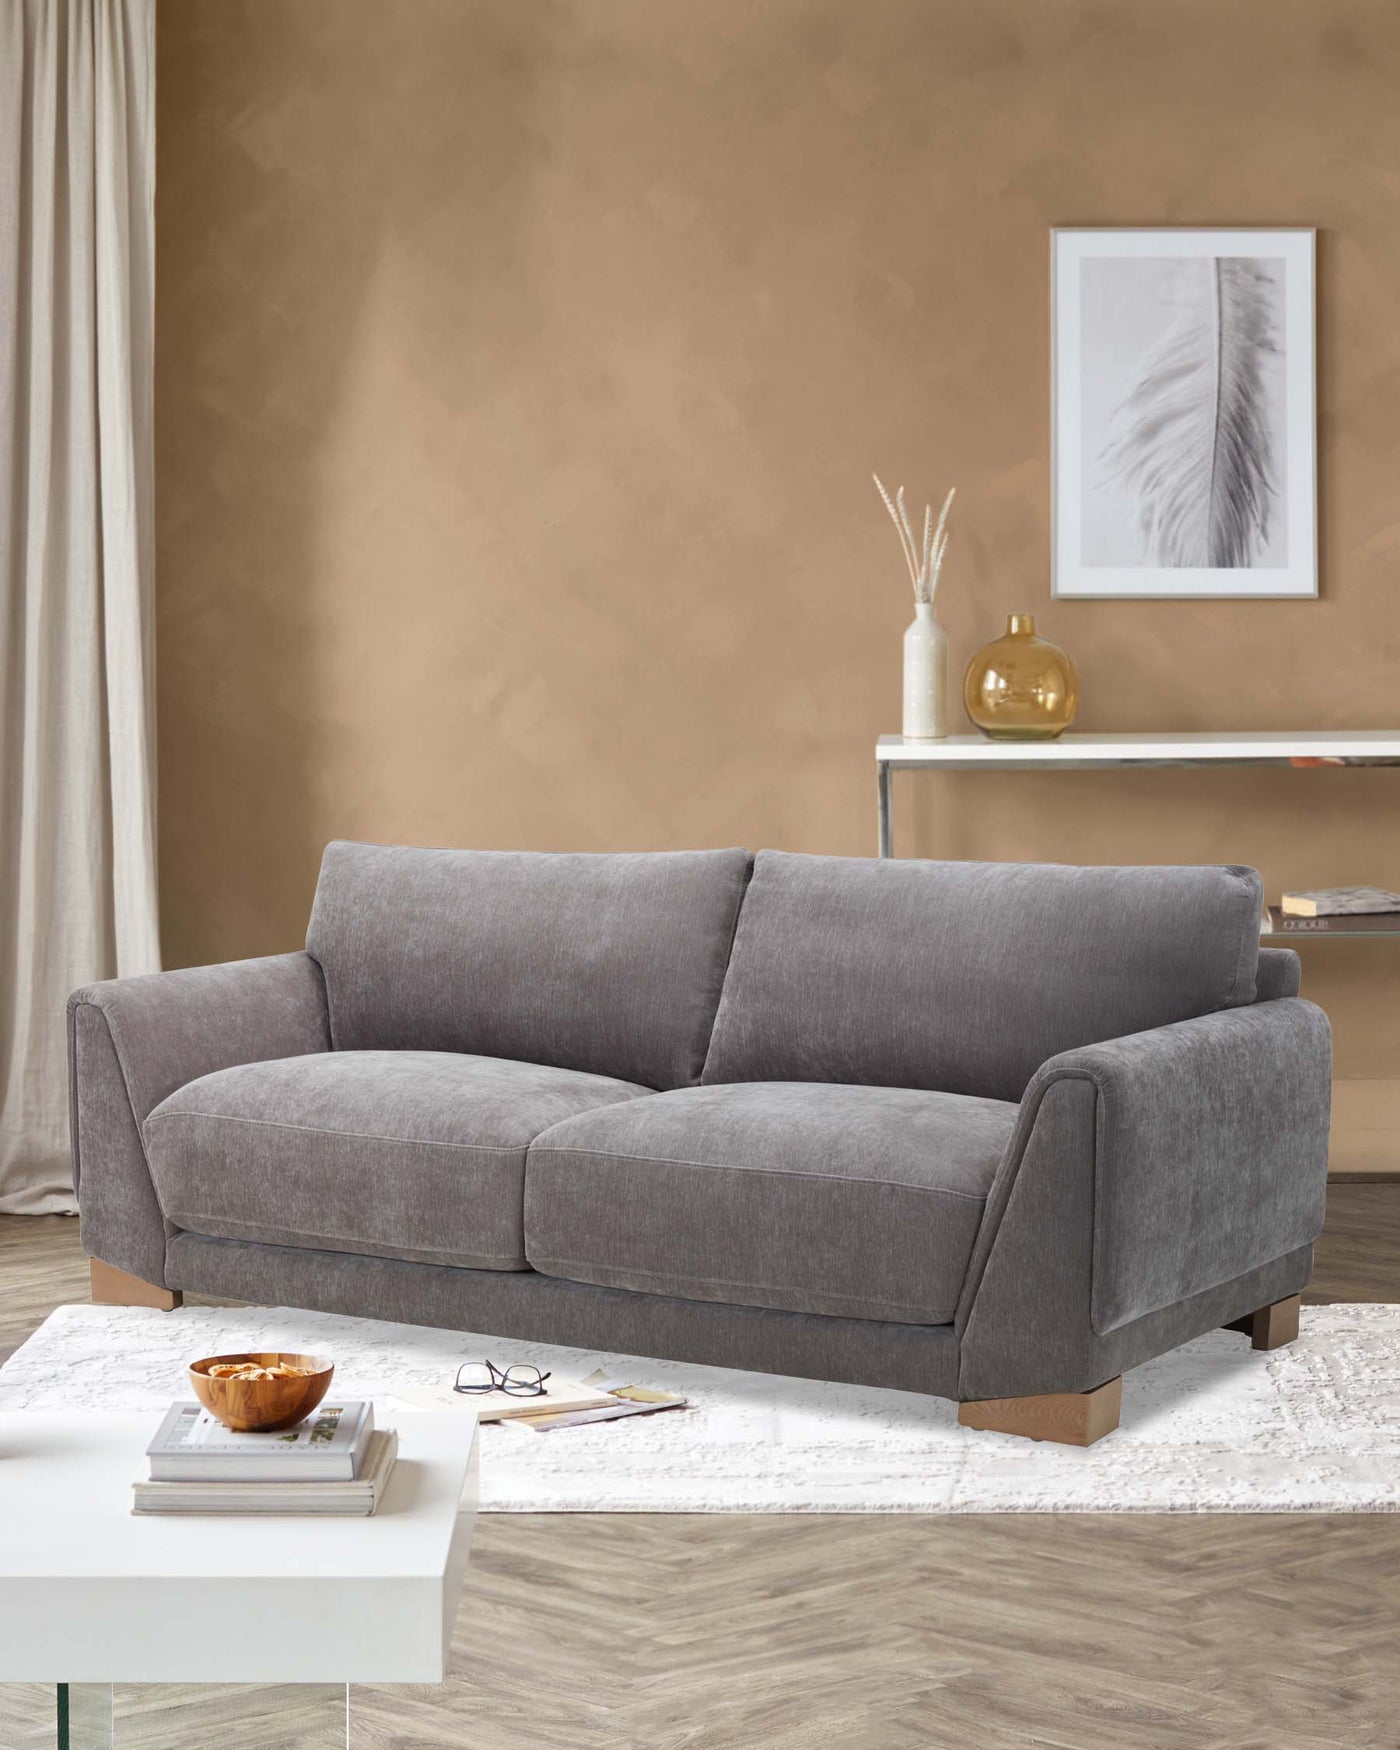 Saige mid grey fabric 3 seater sofa with natural wood legs